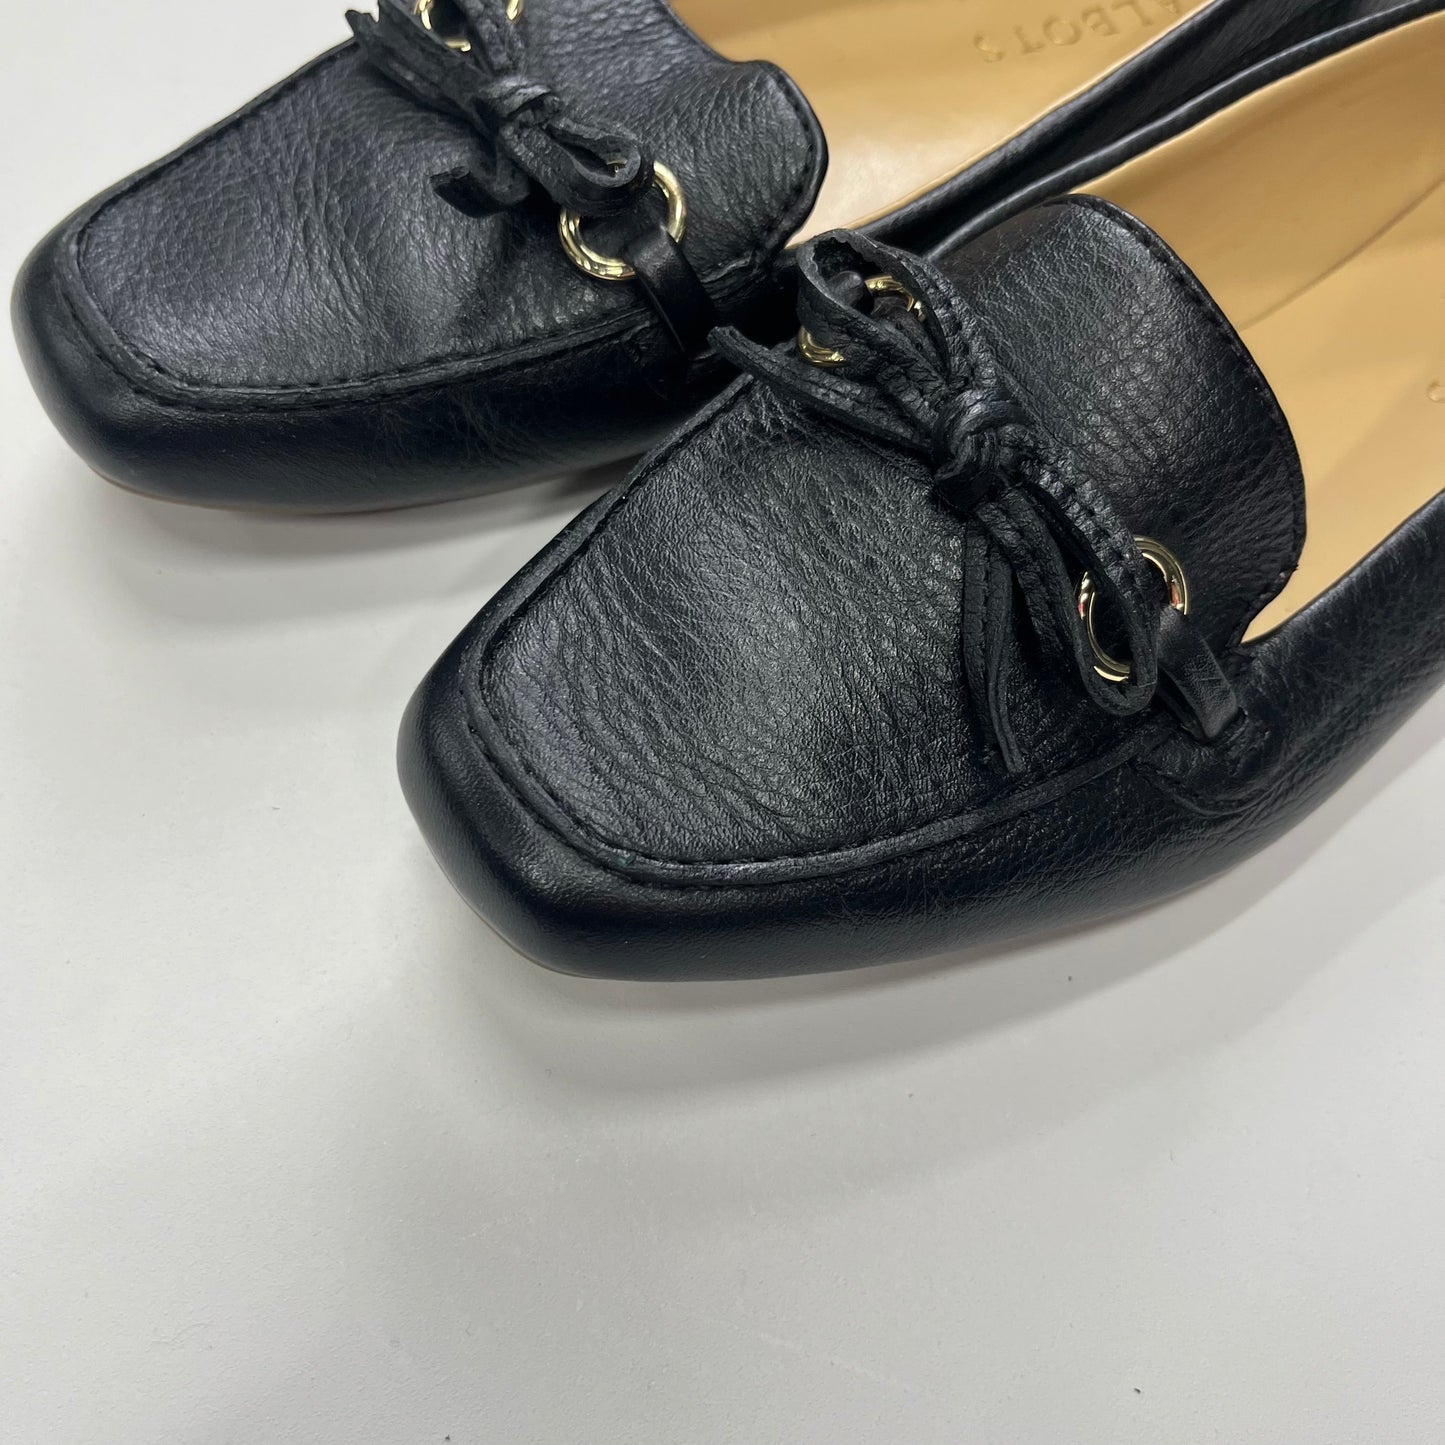 Black Shoes Flats Loafer Oxford Talbots, Size 7